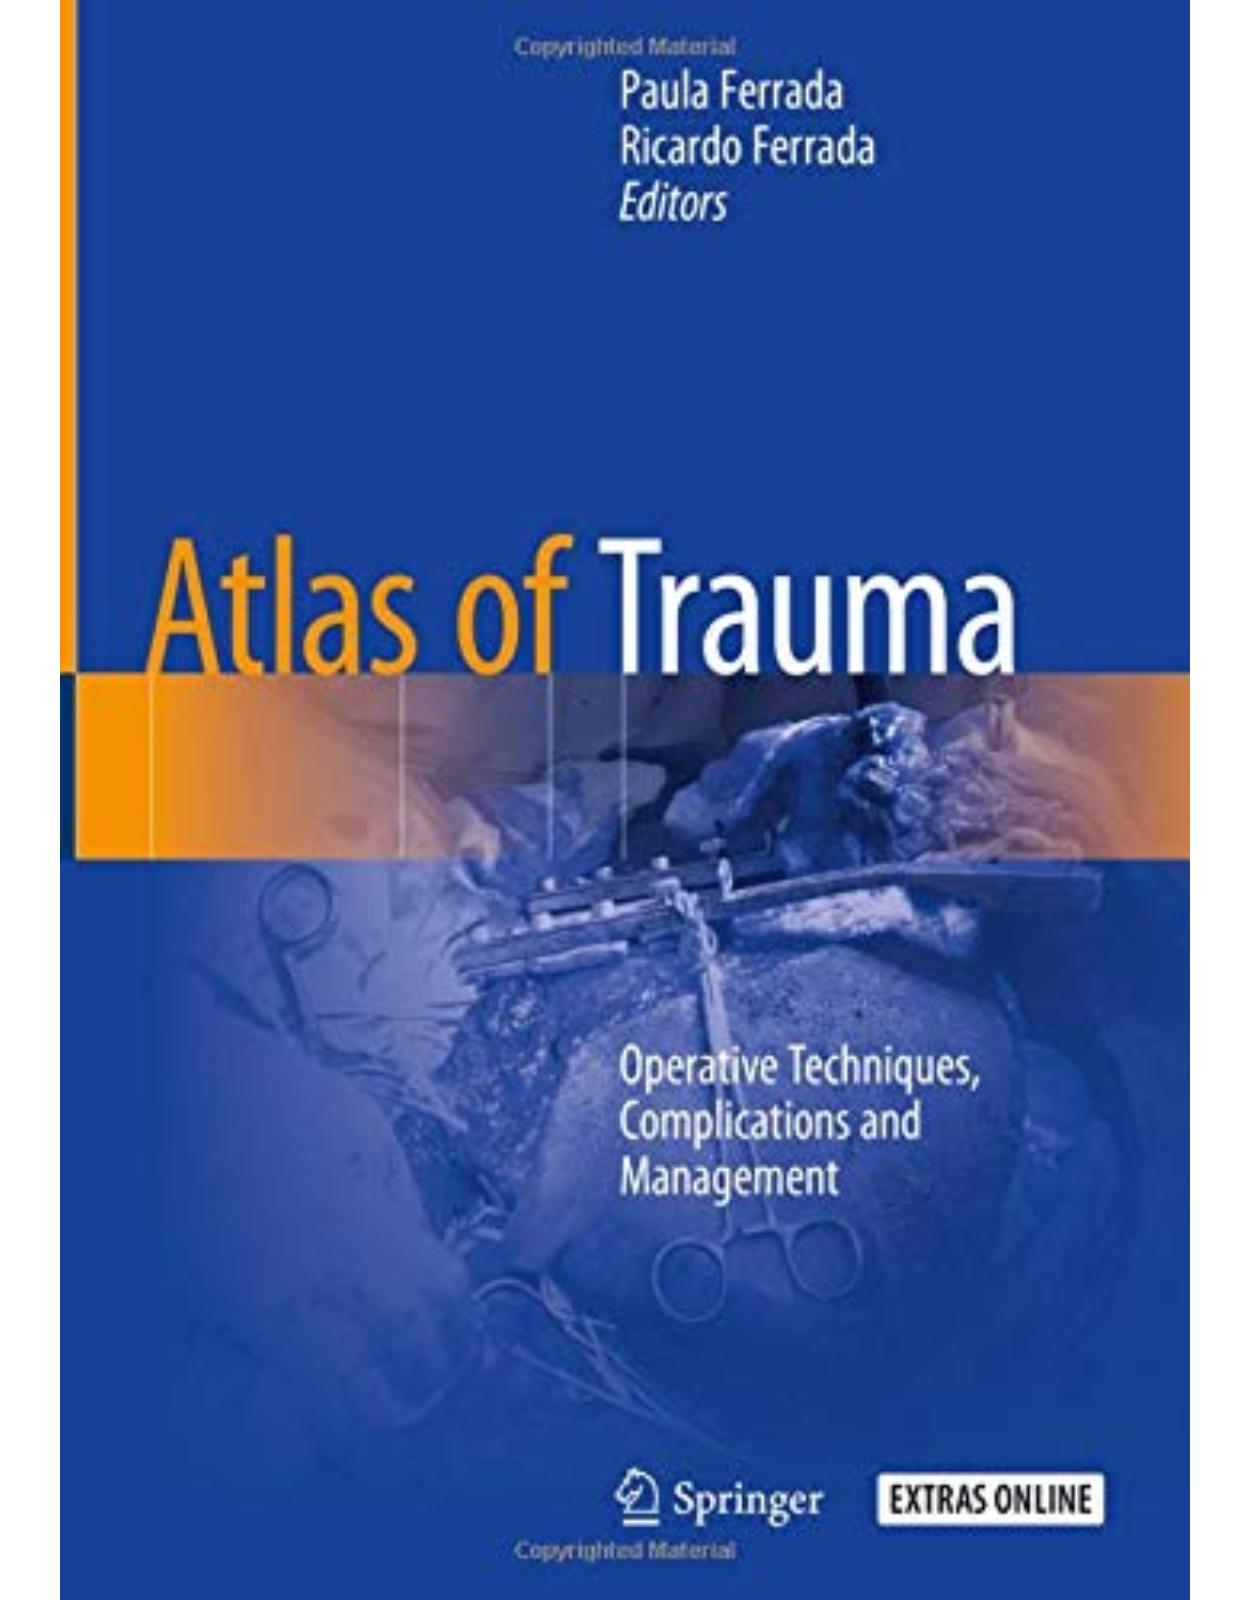 Atlas of Trauma: Operative Techniques, Complications and Management